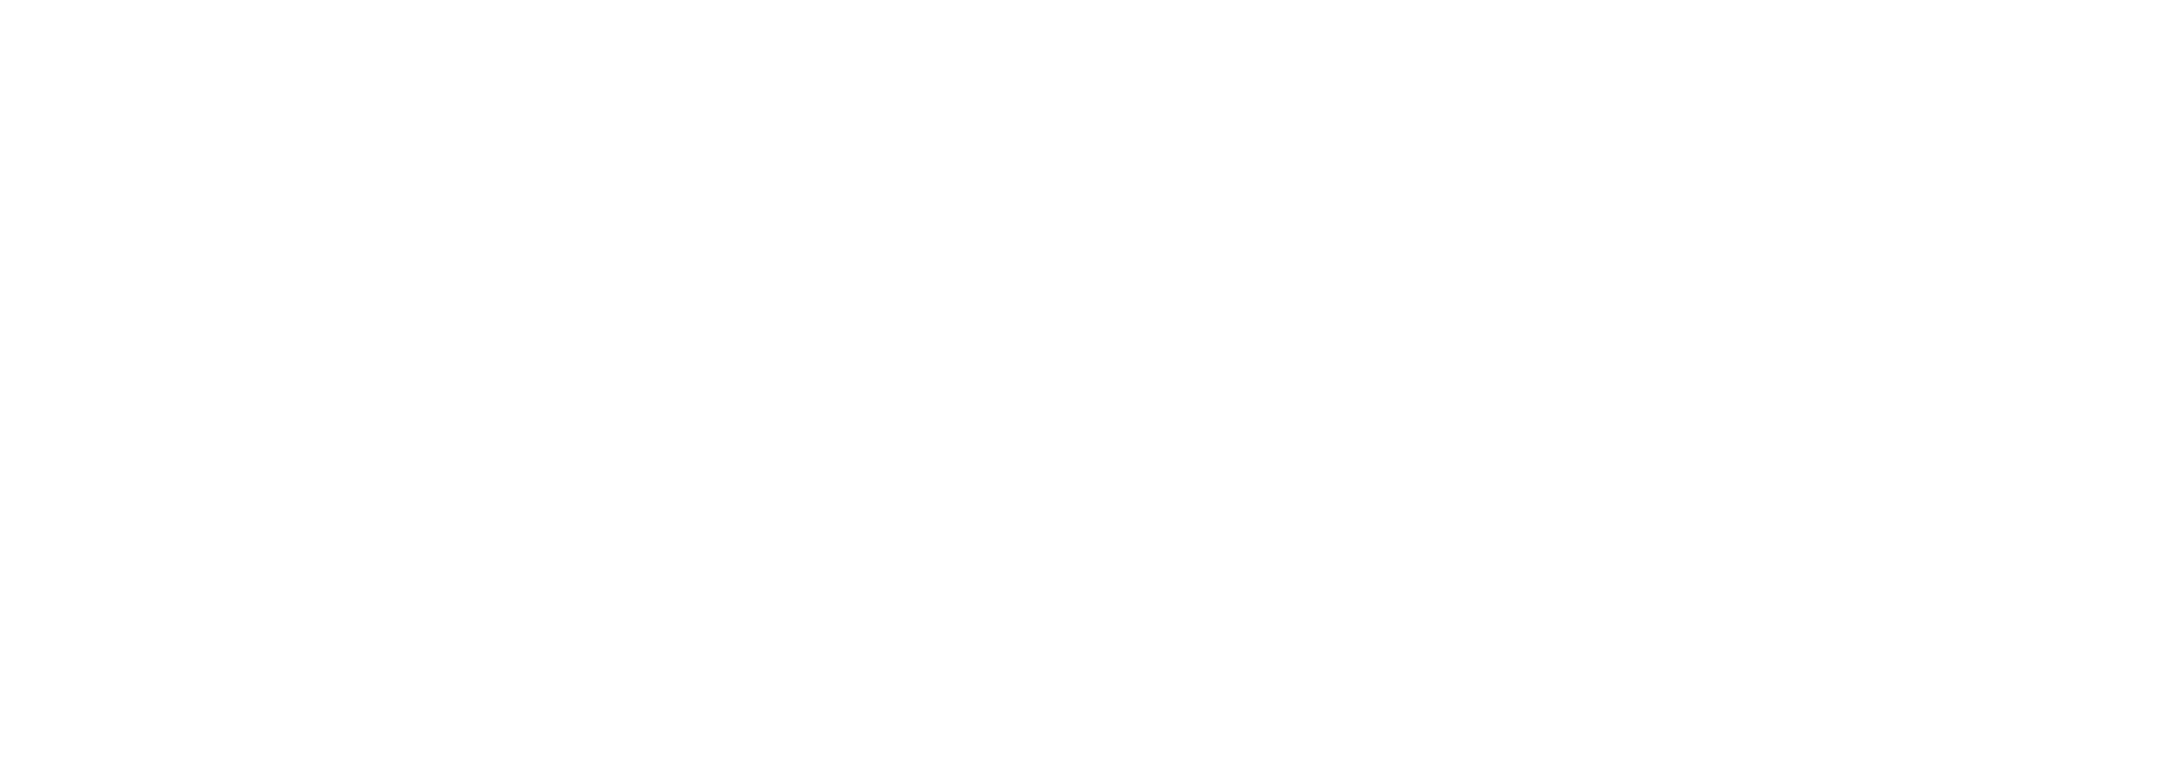 missing the-warfield logo